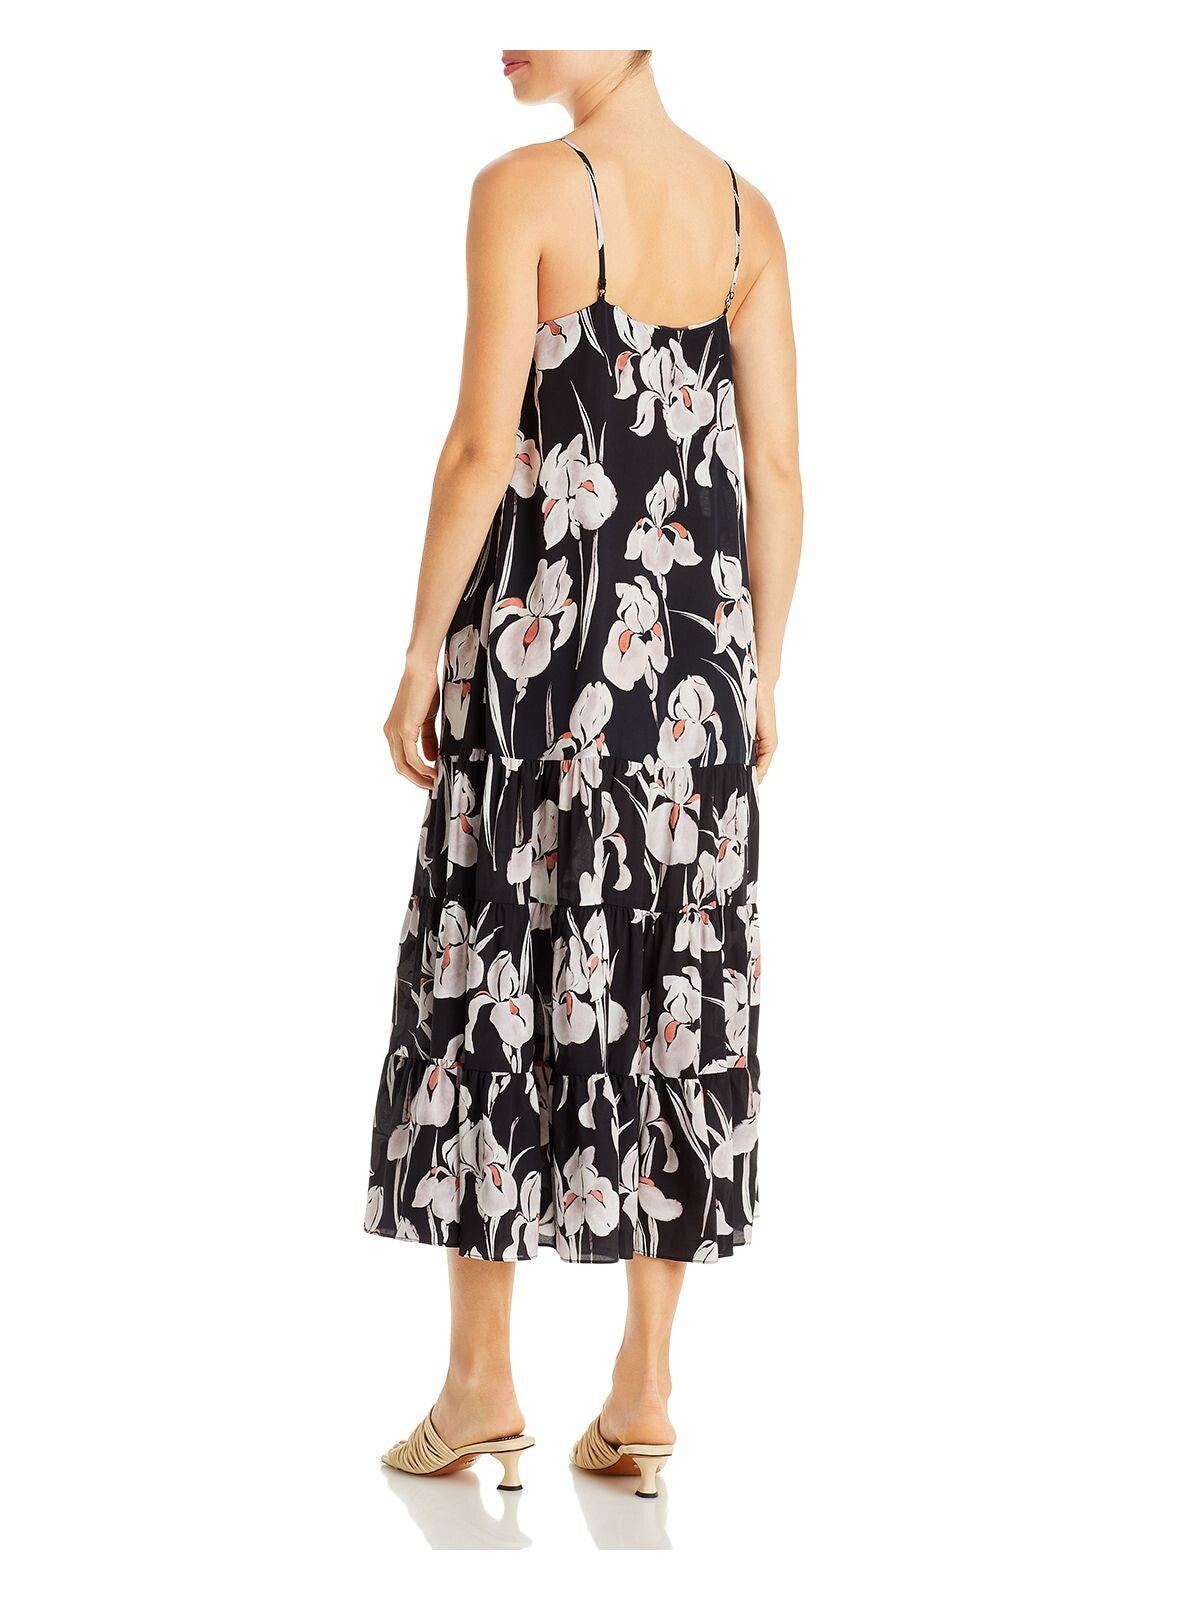 JASON WU Womens Black Adjustable Button Up Unlined Tiered Floral Spaghetti Strap V Neck Midi Fit + Flare Dress 2